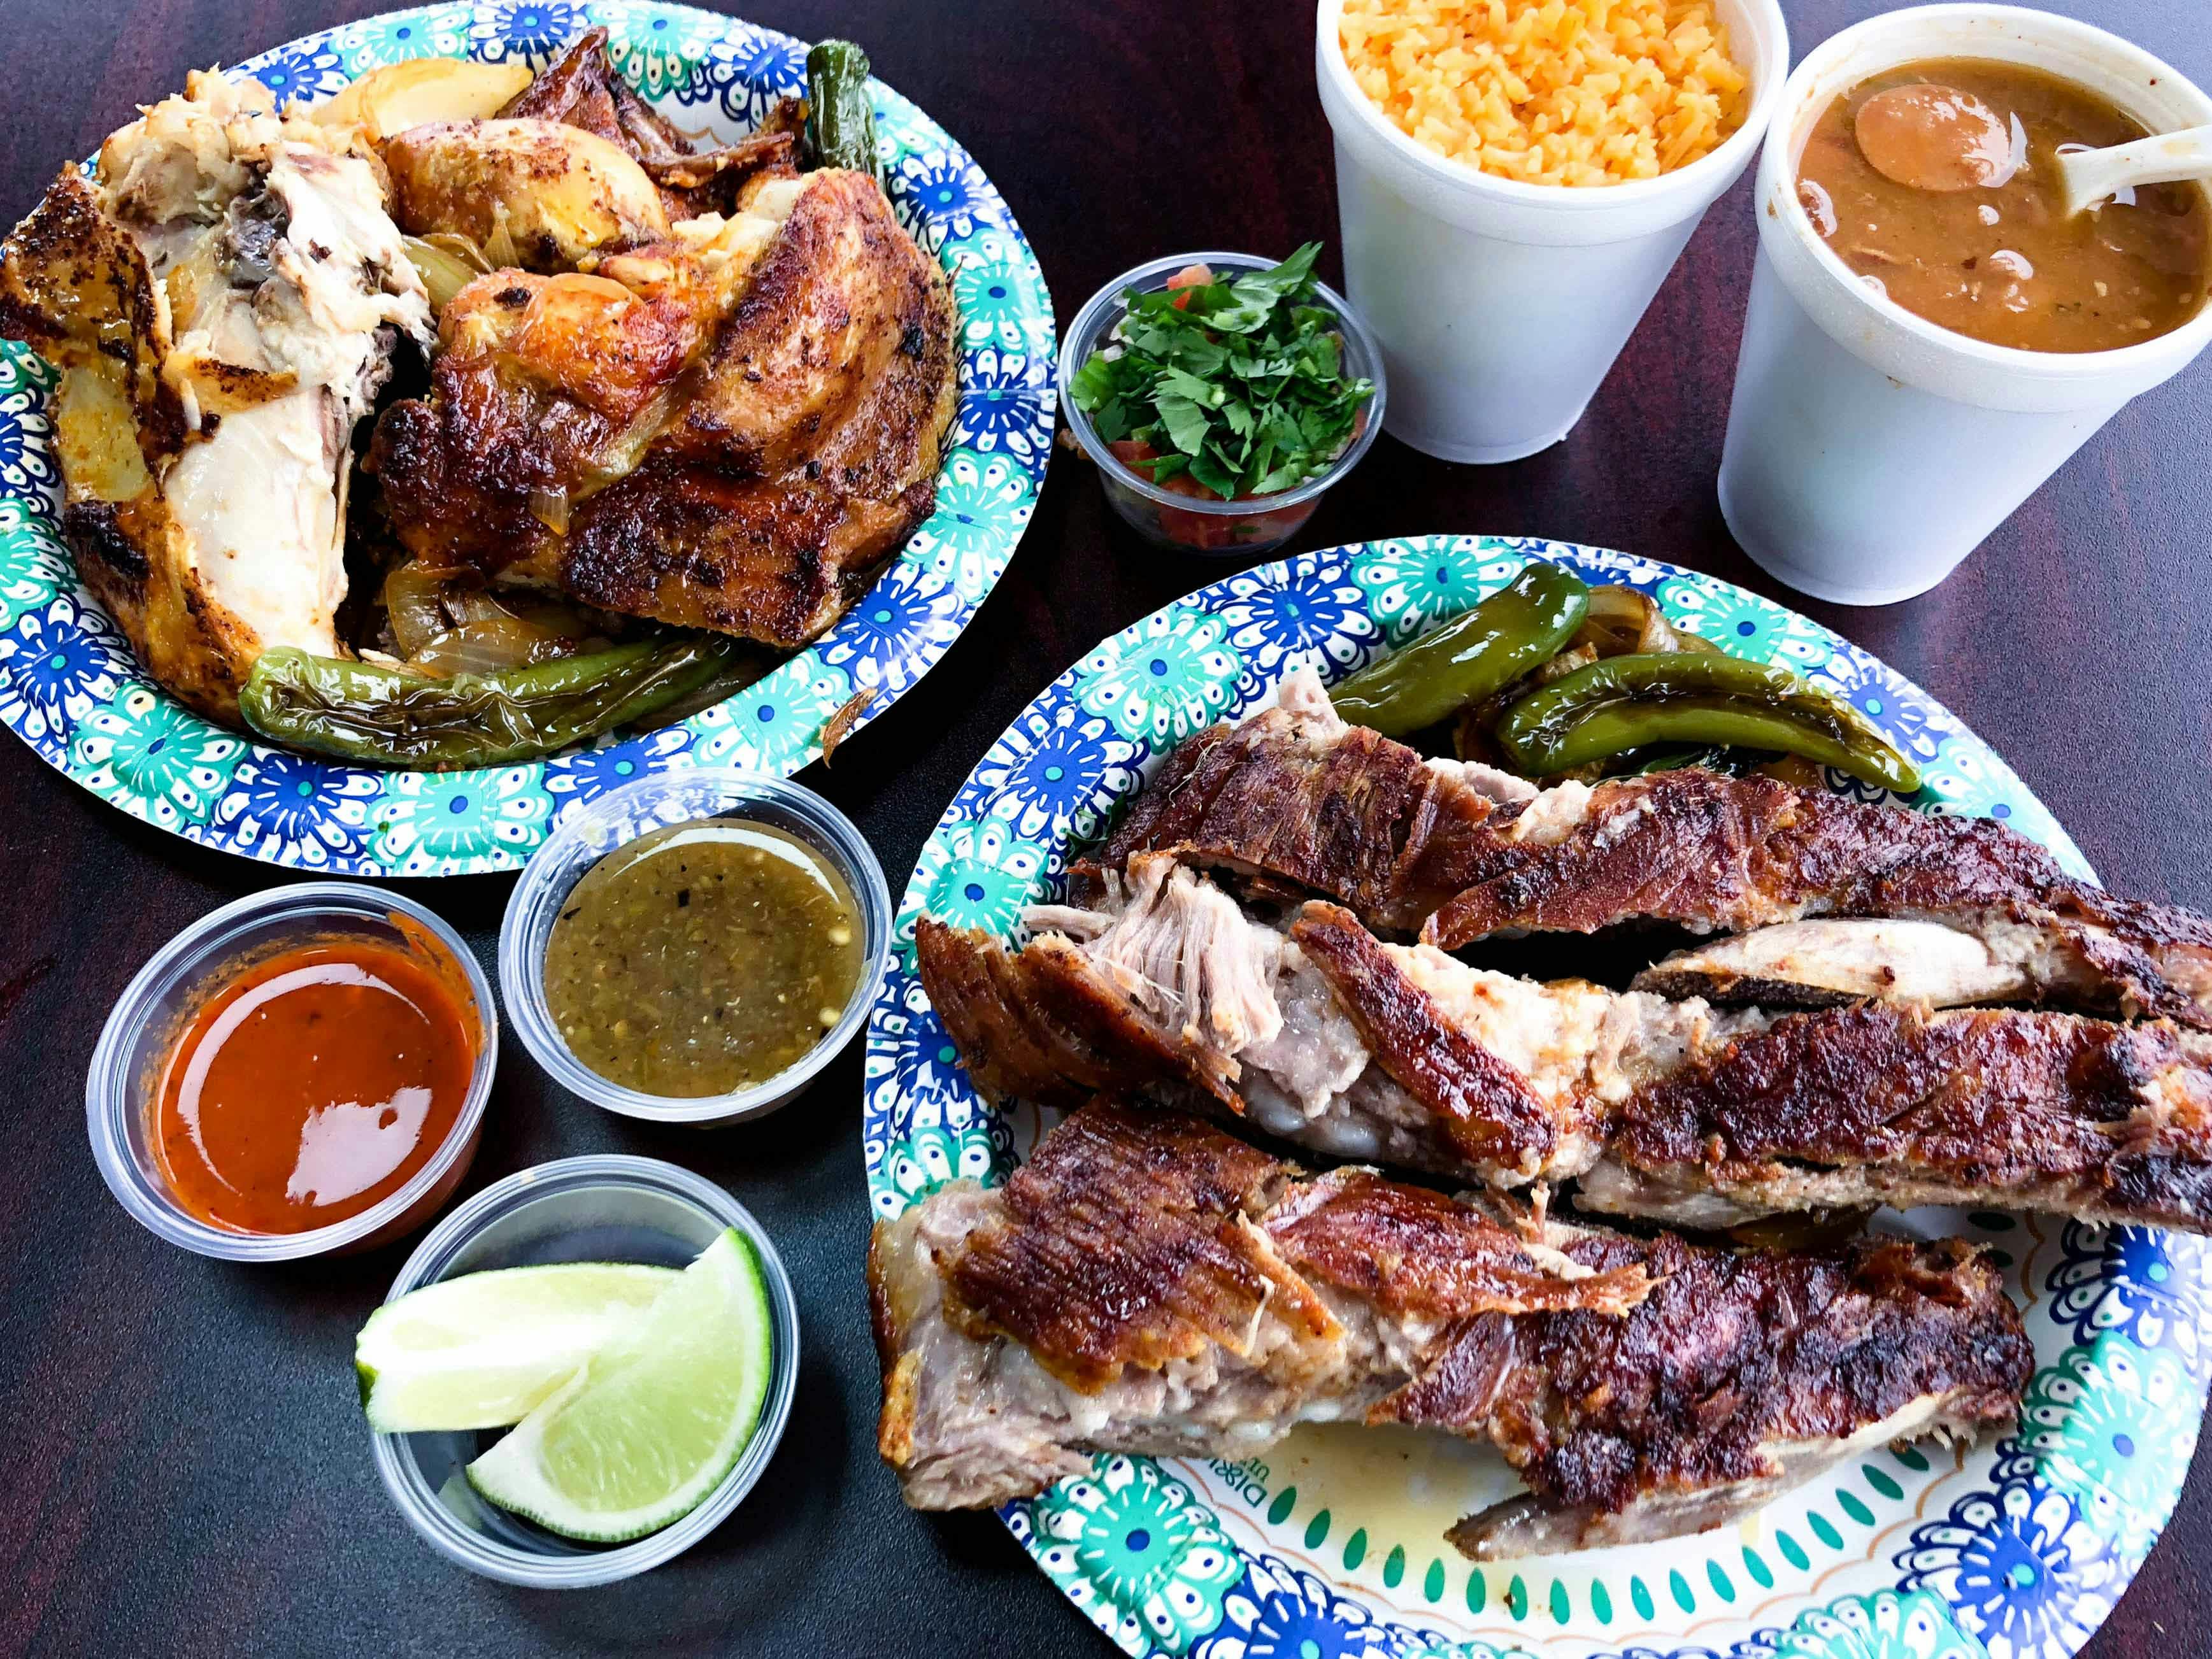 Plates of meals from Pollos La Pullitas